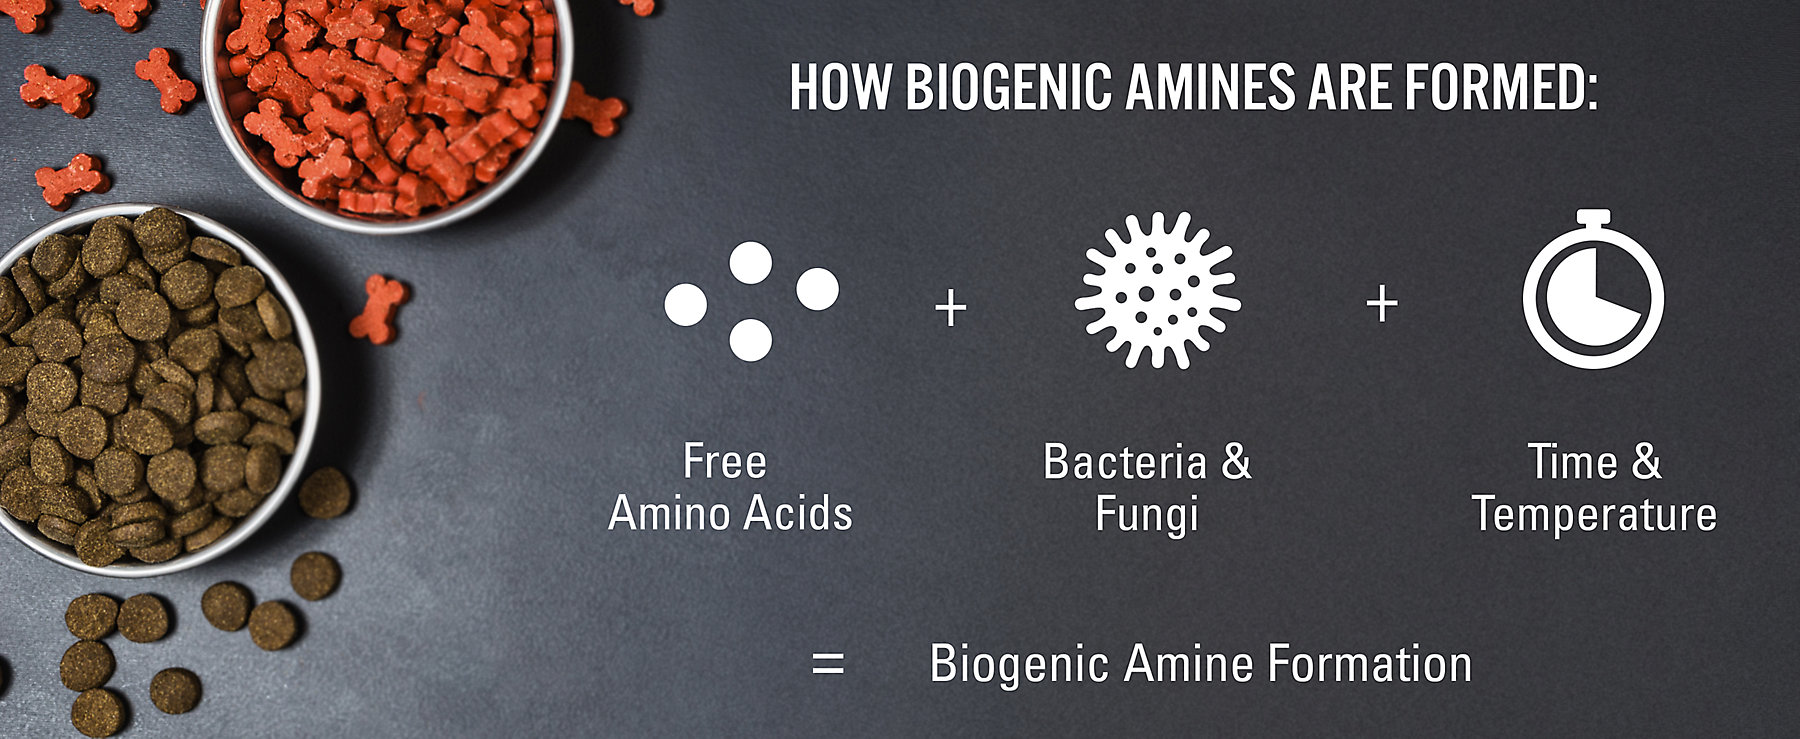 How Biogenic Amines Are Formed_small-1